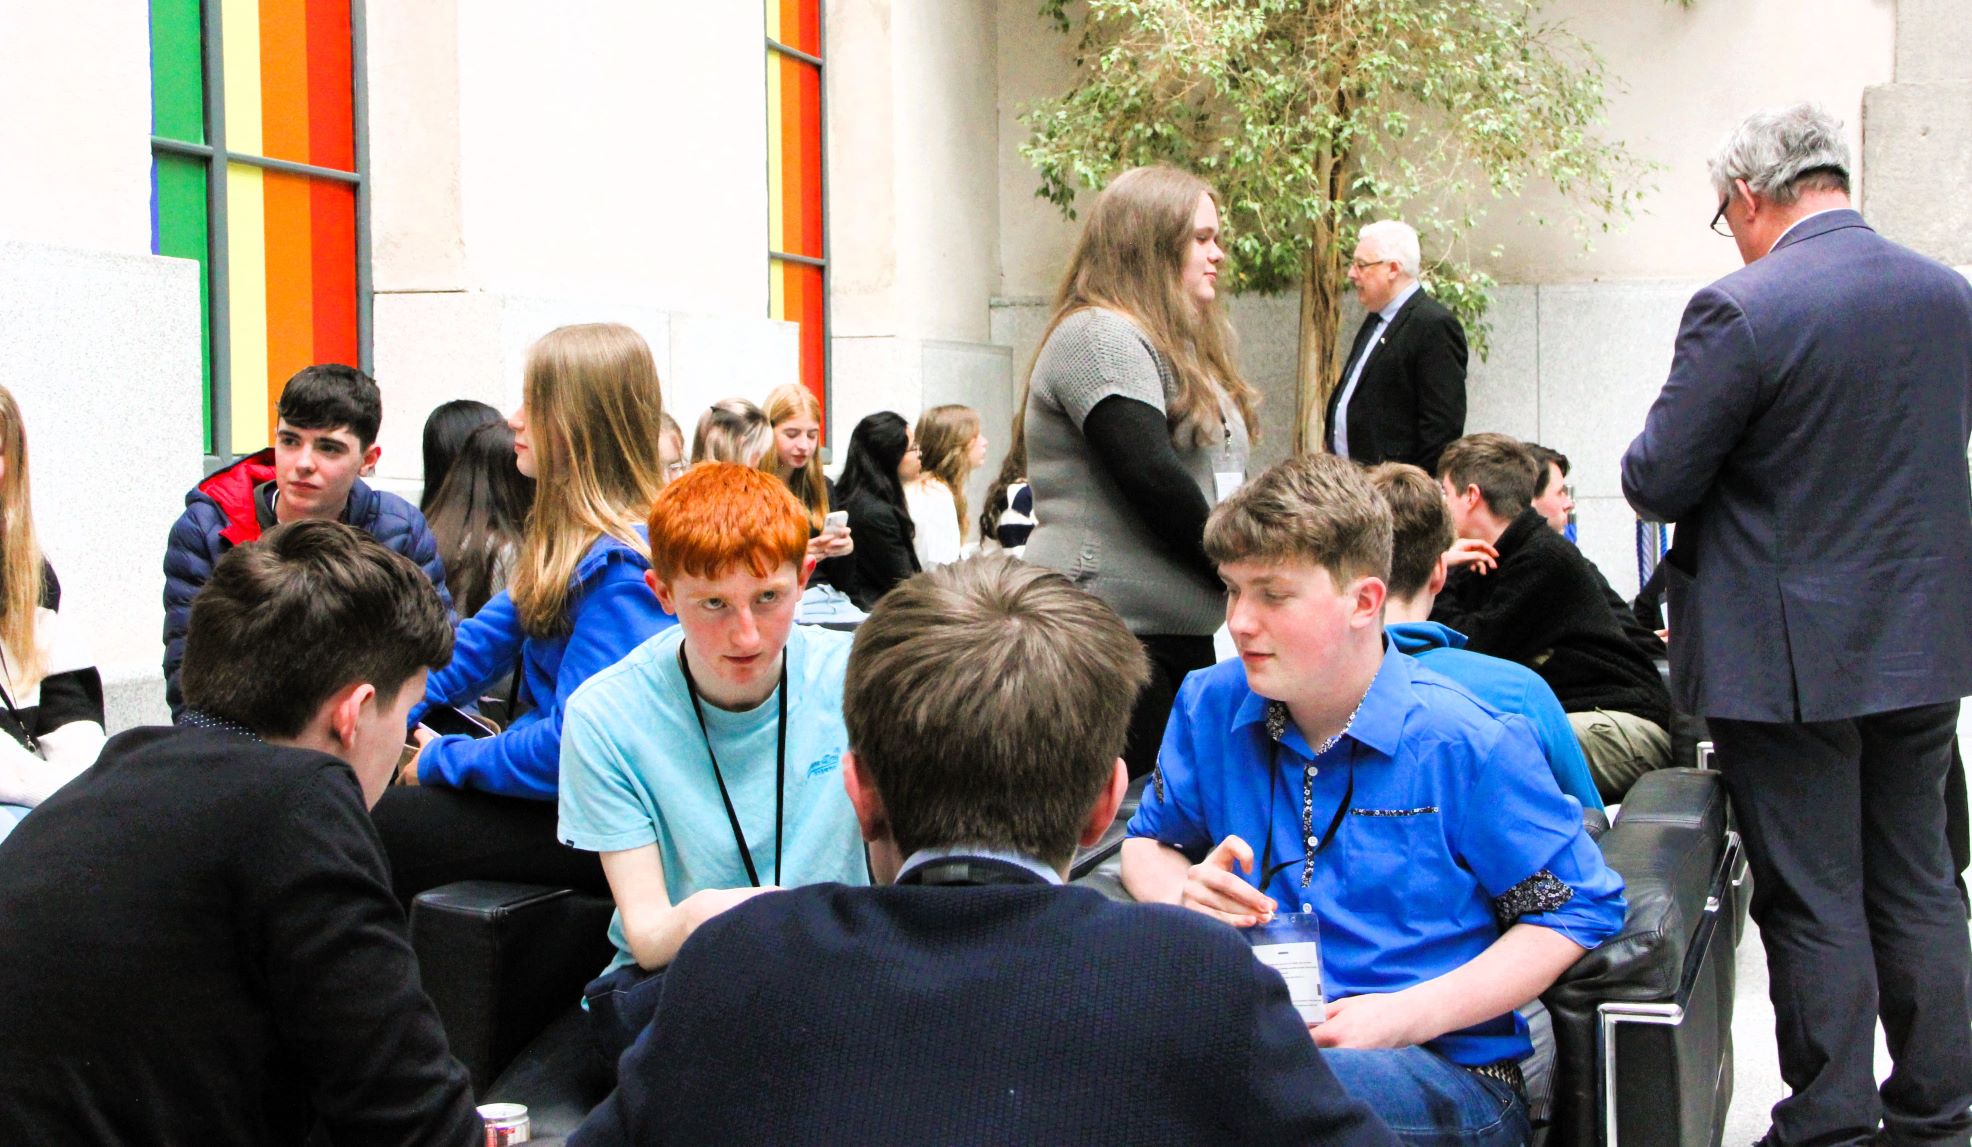 TY students attending workshops in Leinster House meet TDs for an informal chat during their lunch break